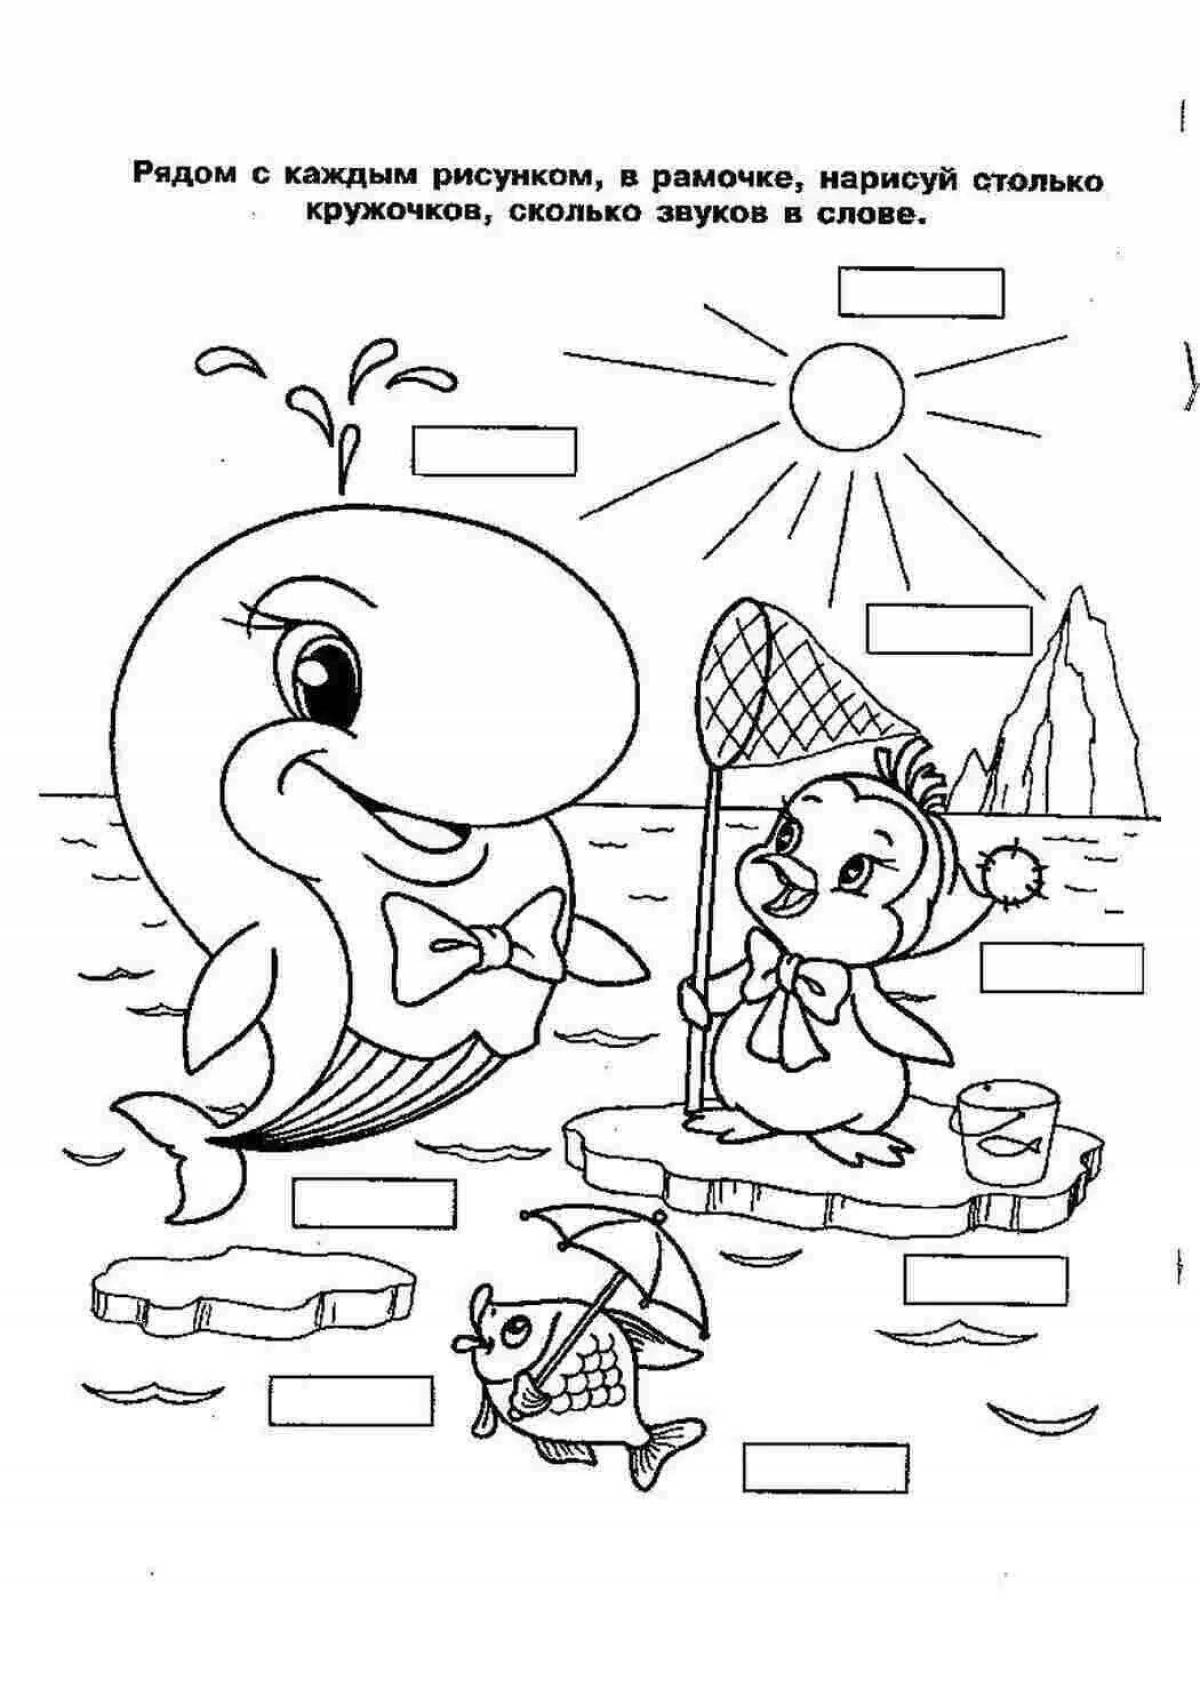 Color-frenzy syllabic coloring page for grade 1